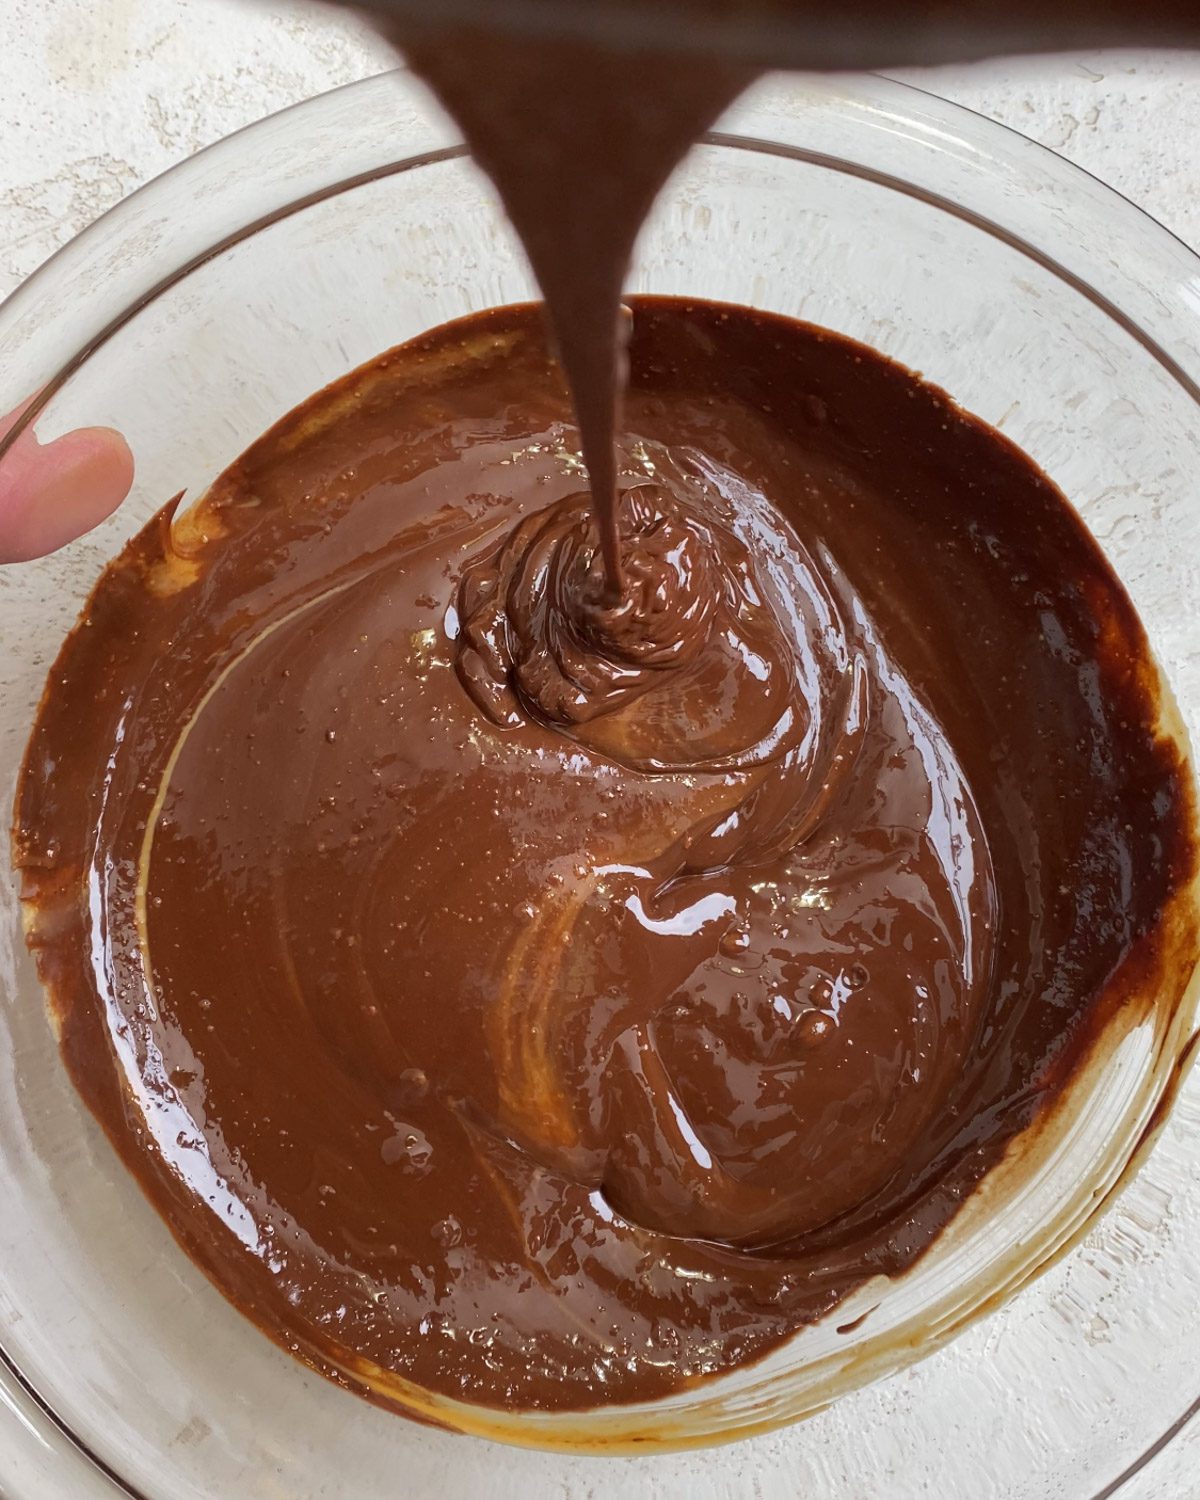 process shot of completed mixing of chocolate and peanut butter together in bowl